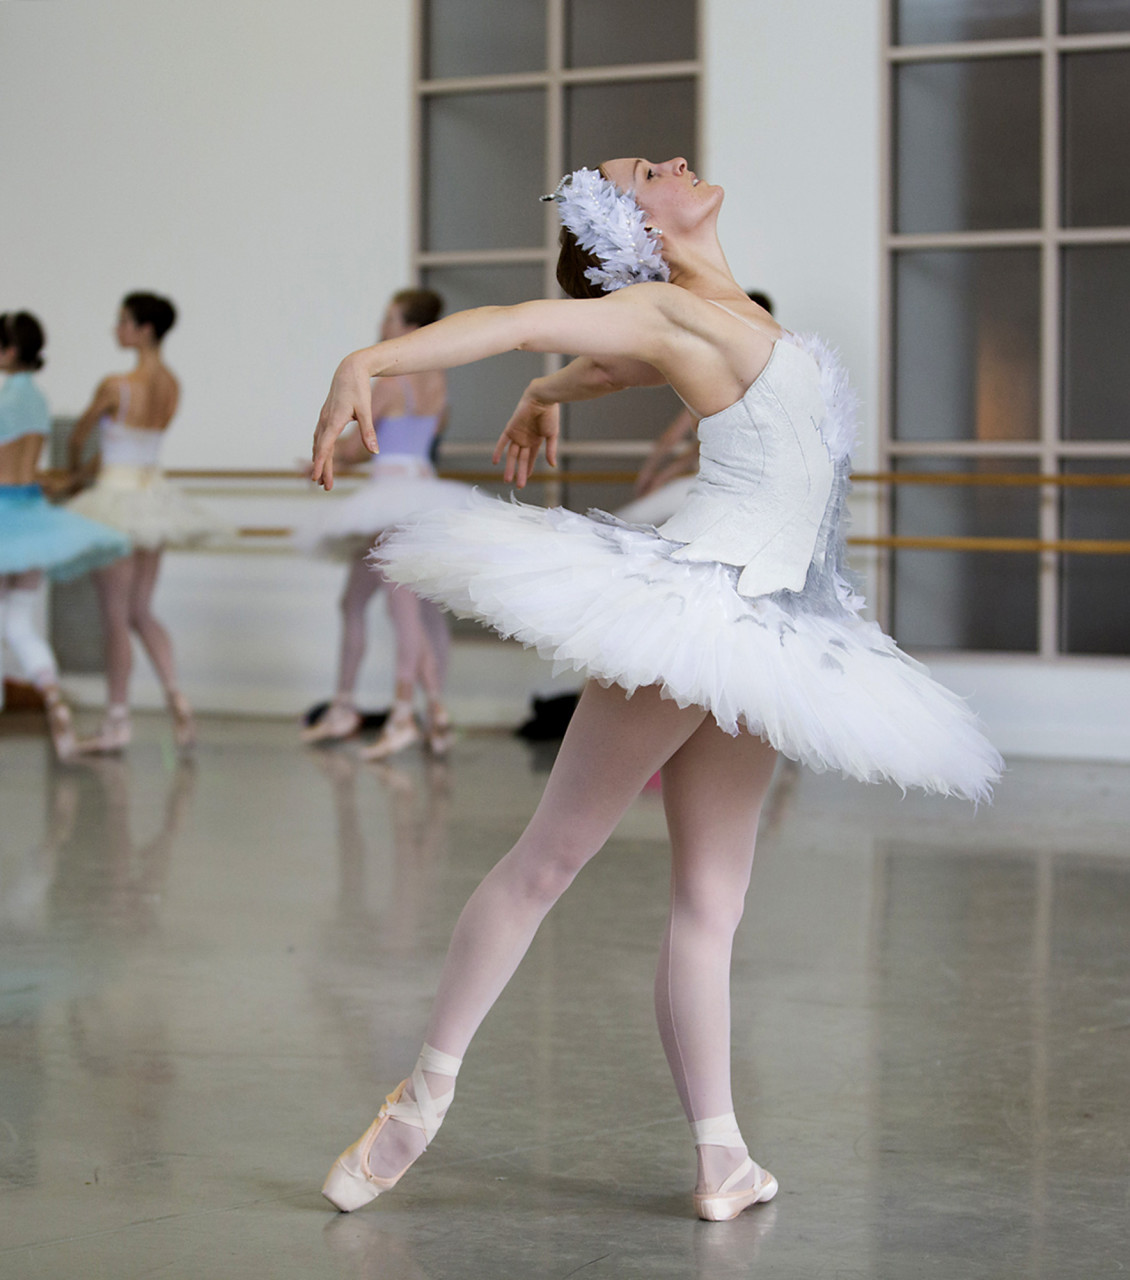 Ashley Ellis rehearses the role of Odette during a costume run-through of "Swan Lake" at the Boston Ballet studios. (Lawrence Elizabeth Knox)